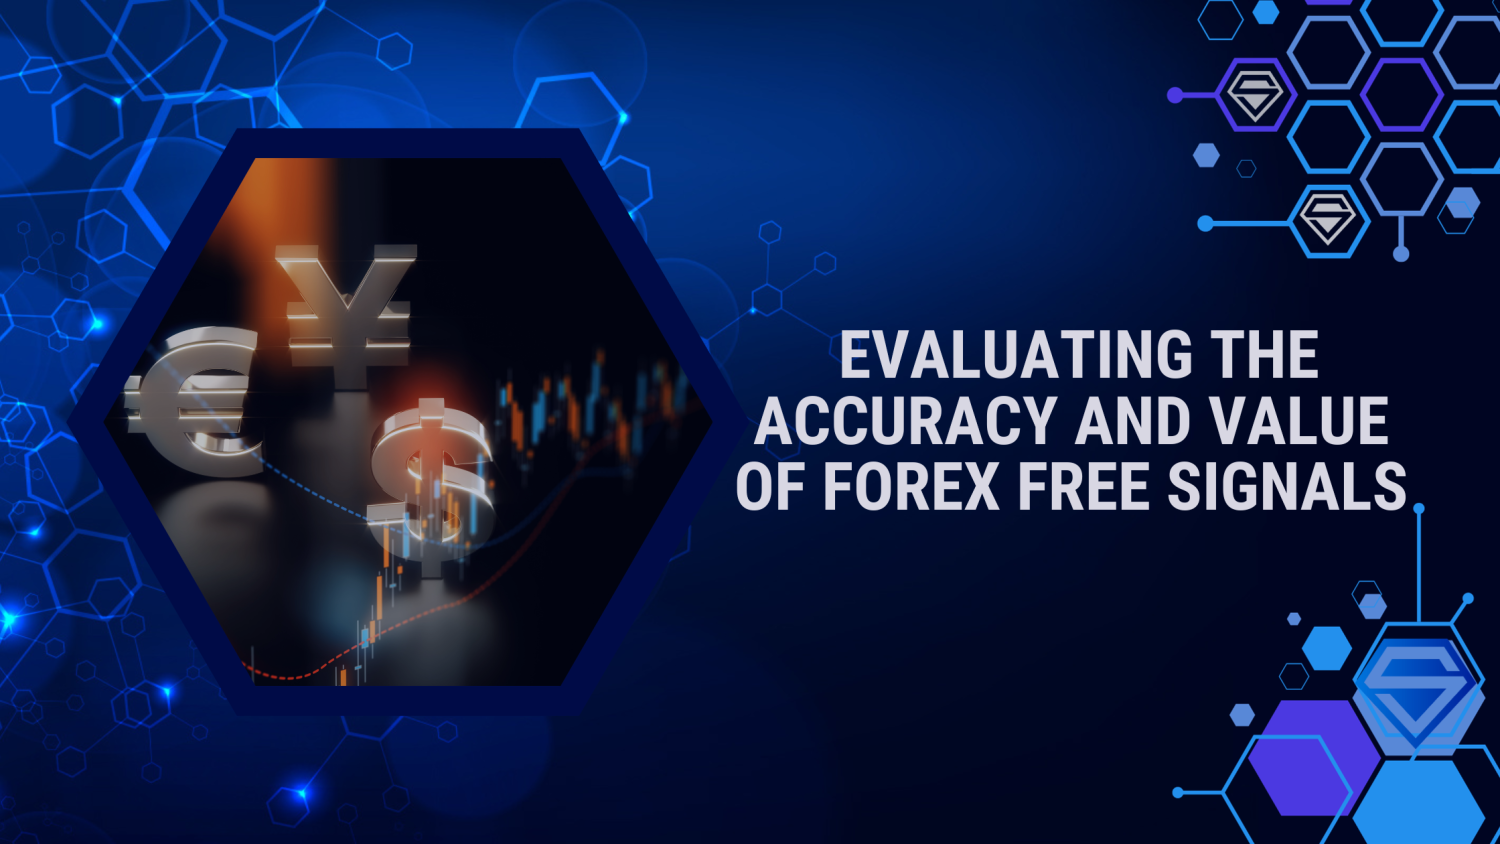 Forex Free Signals: Evaluating the Accuracy and Value of No-Cost Signals